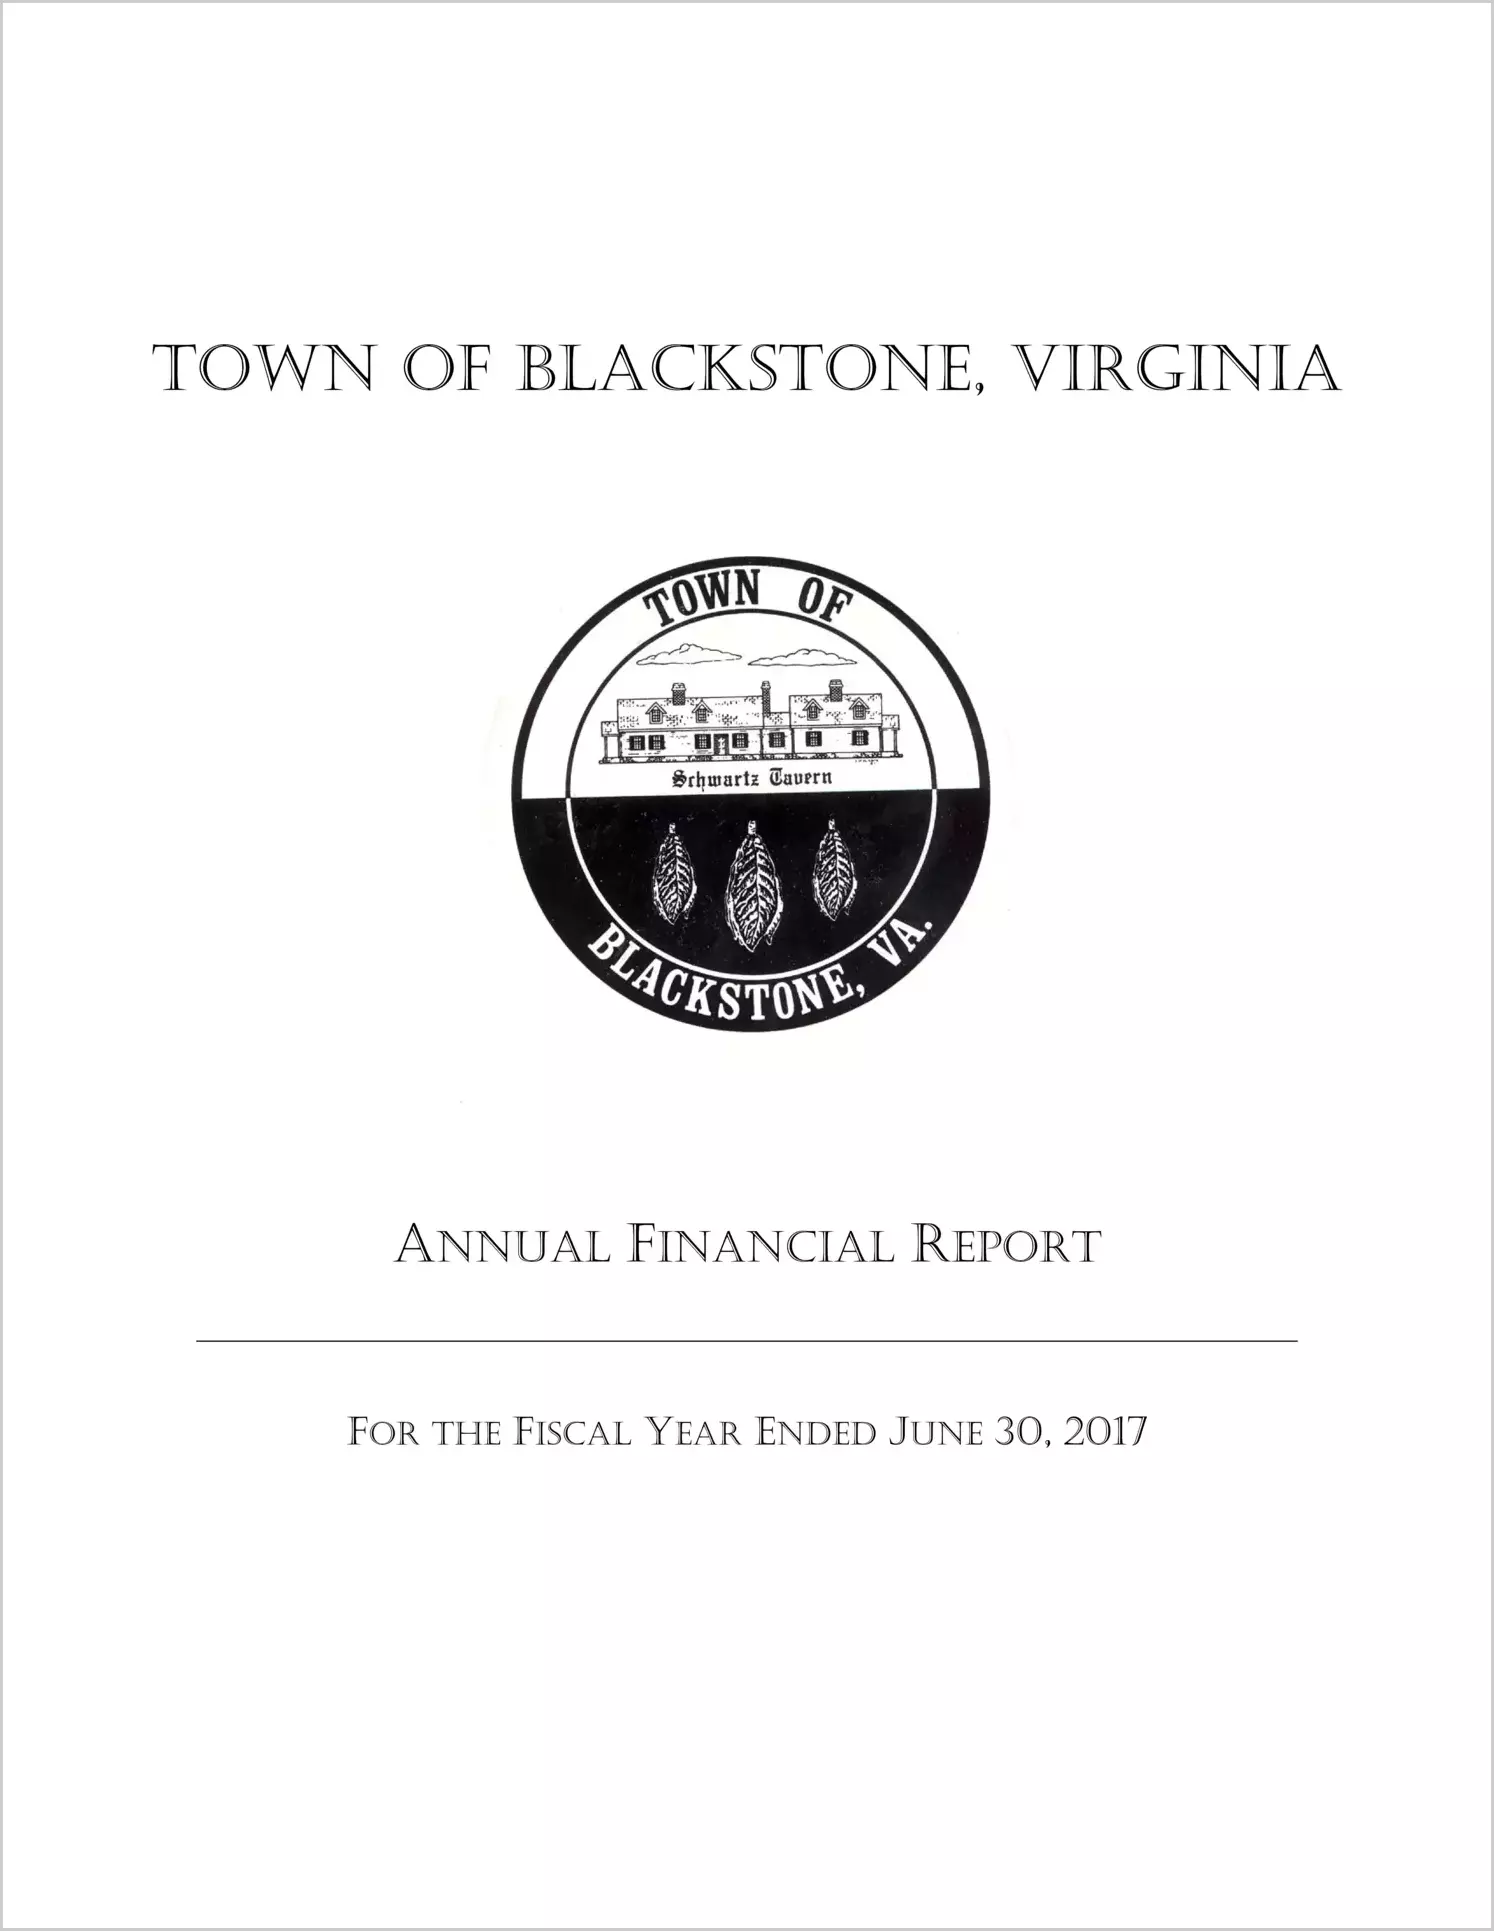 2017 Annual Financial Report for Town of Blackstone